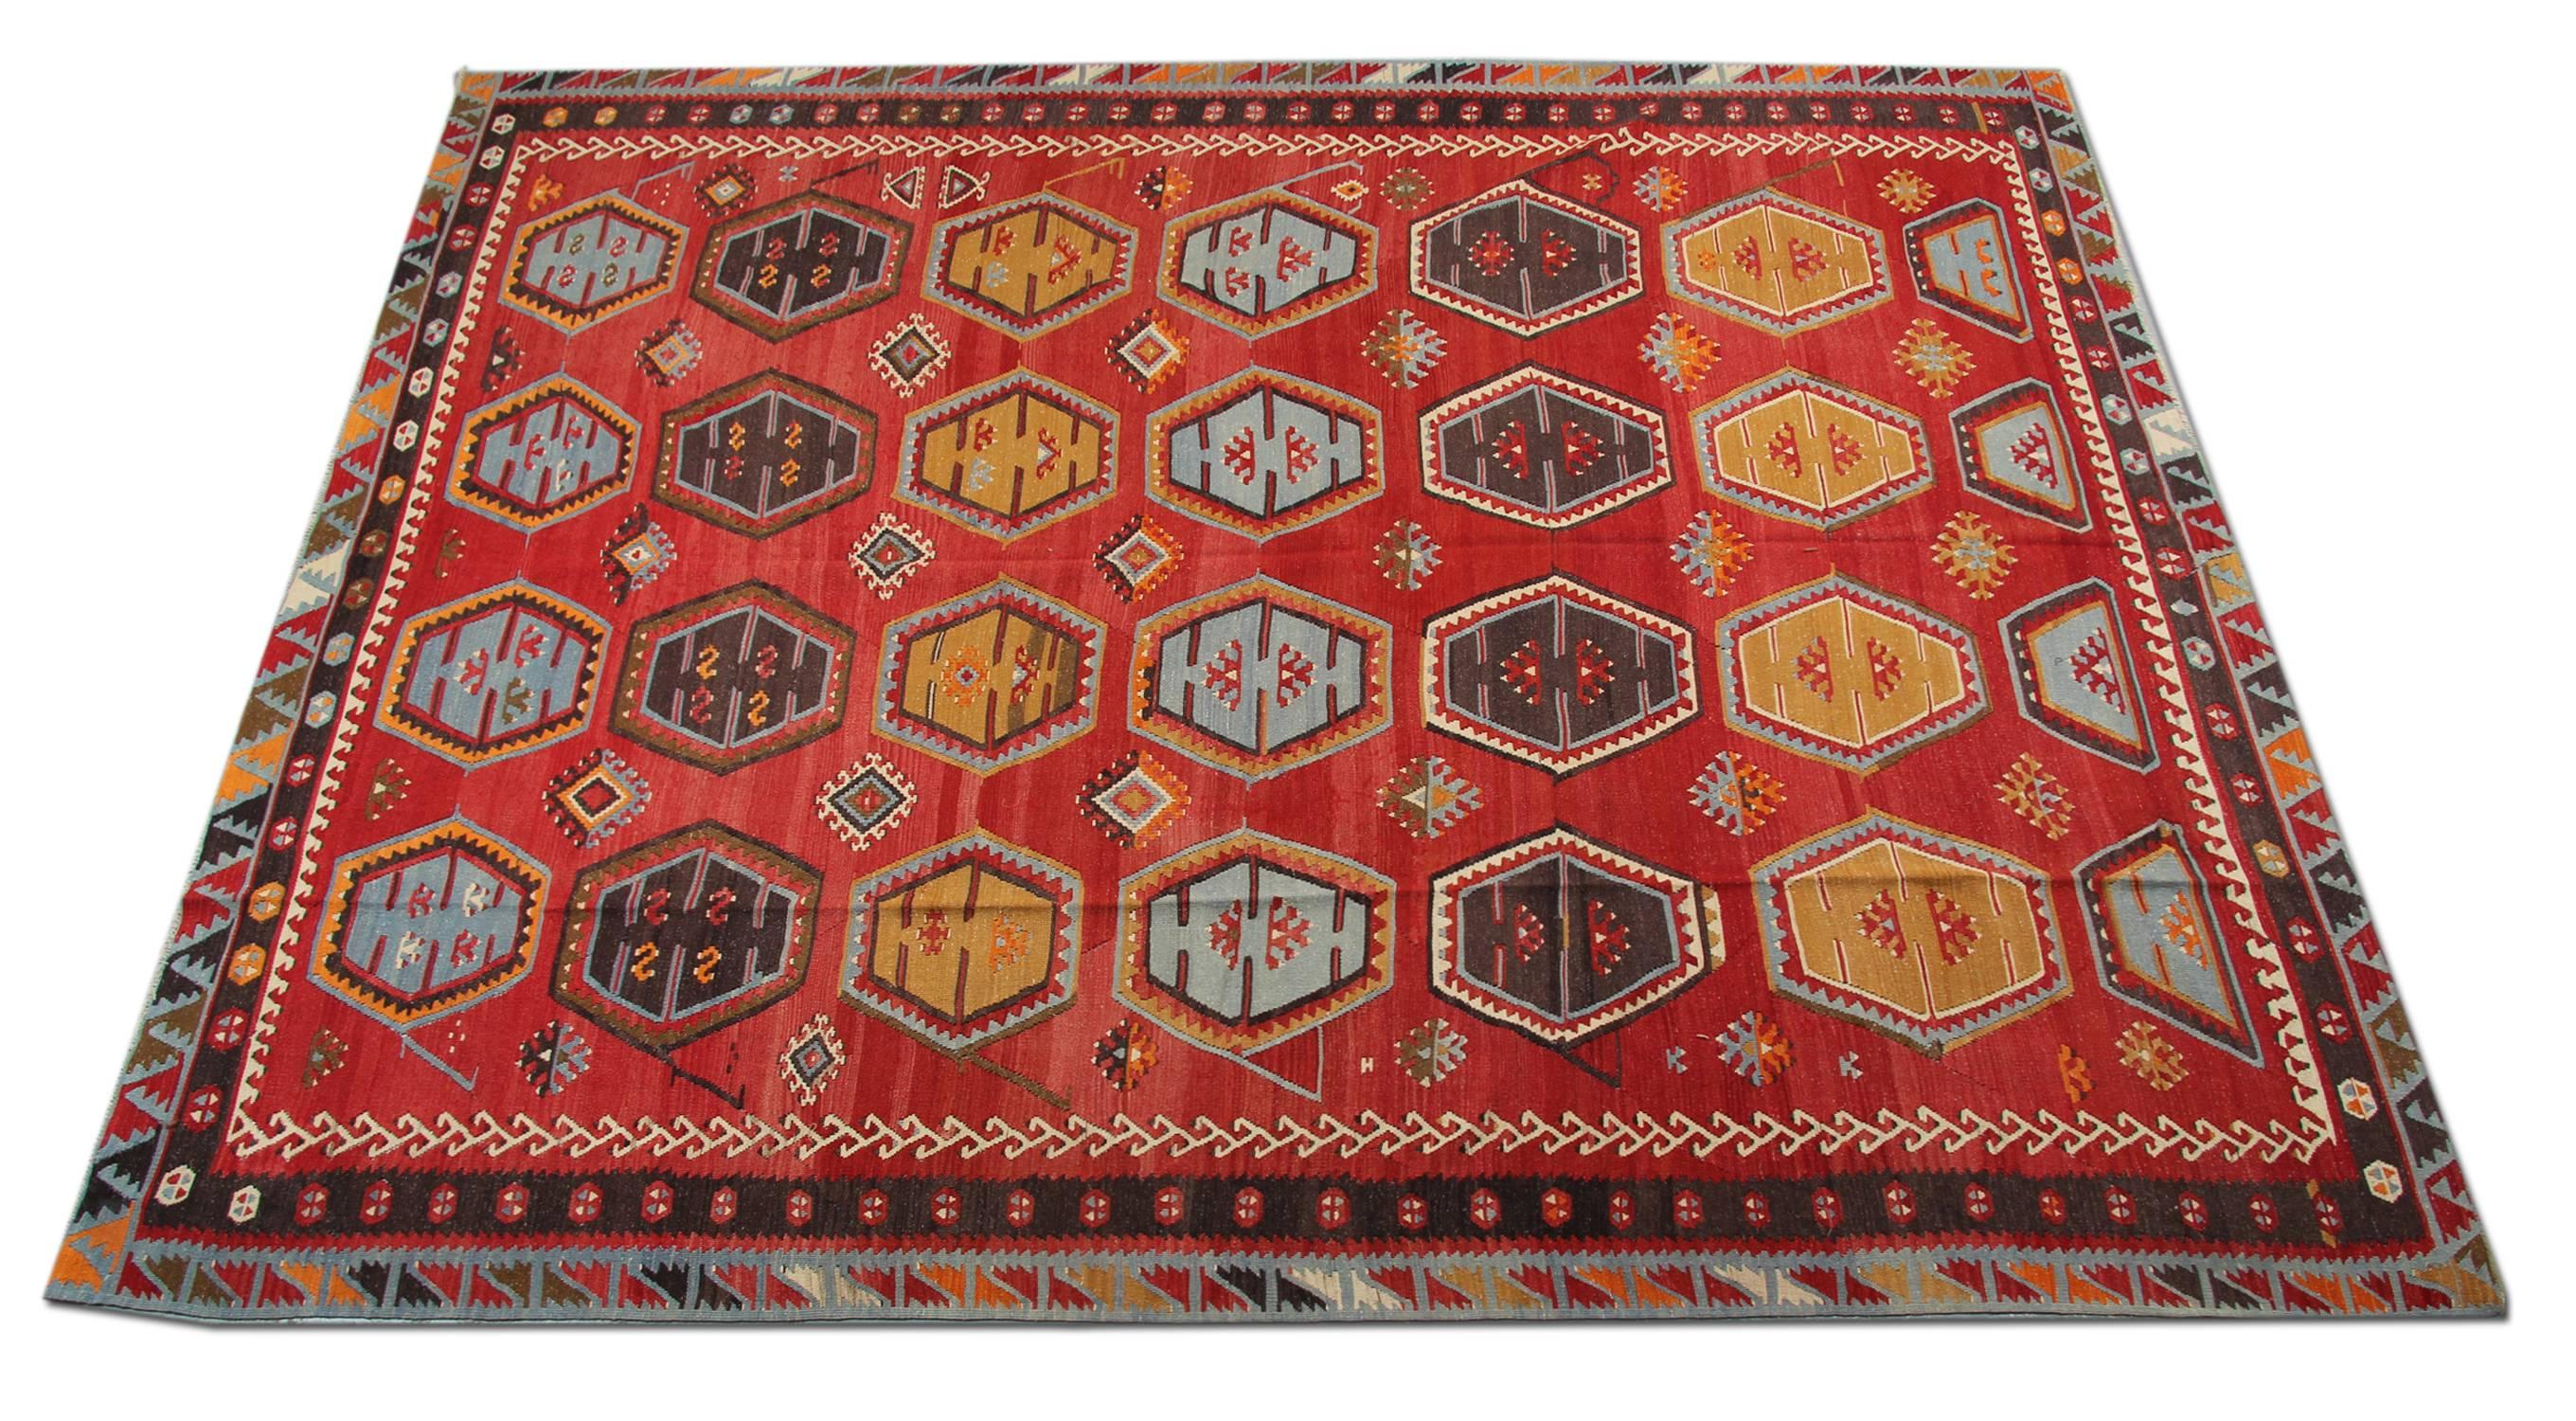 The handmade carpet S¸arkis¸la Kilim rugs are one of the most decorative rugs, Turkish Kilim can be an additional element of design to one's home decor.
Most Kilims can always be in harmony with the interior and will be complementary with art and